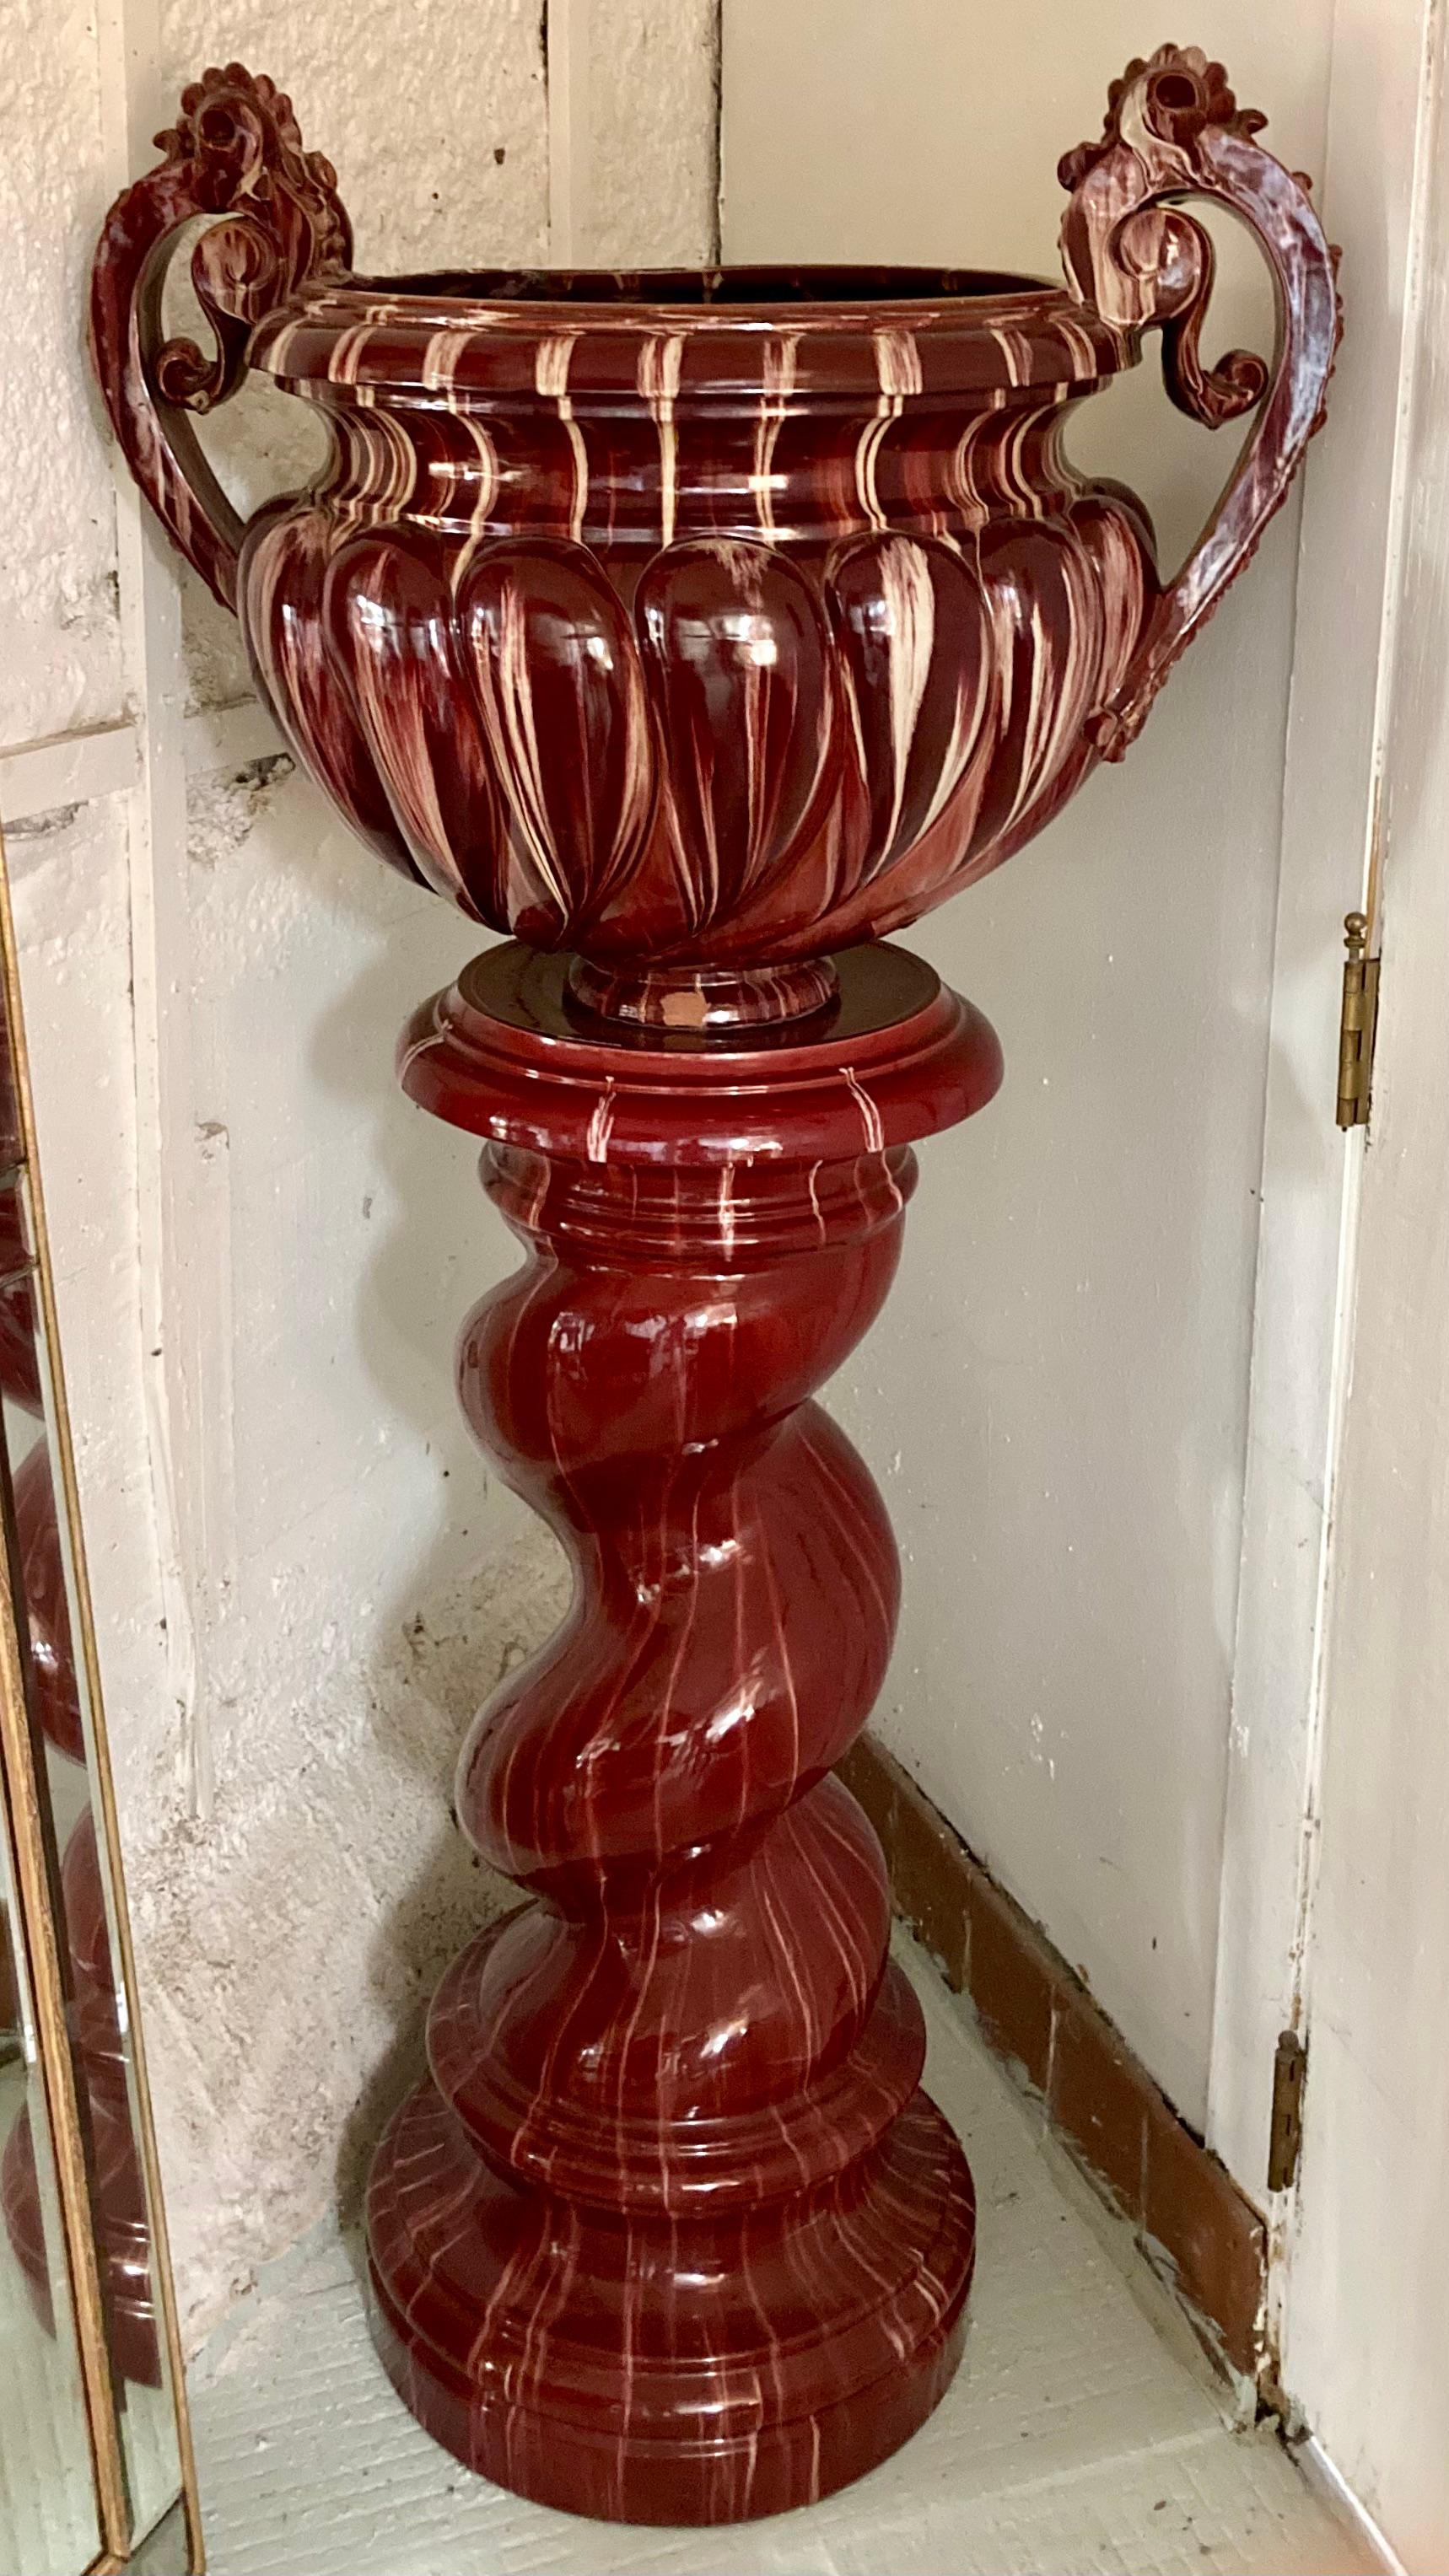 Beautiful glazed burgundy terra cotta urn on a pedestal by French artist Jerome Massier. Great addition to your classic French inspired interiors. Some wear and chips but adds to the character.